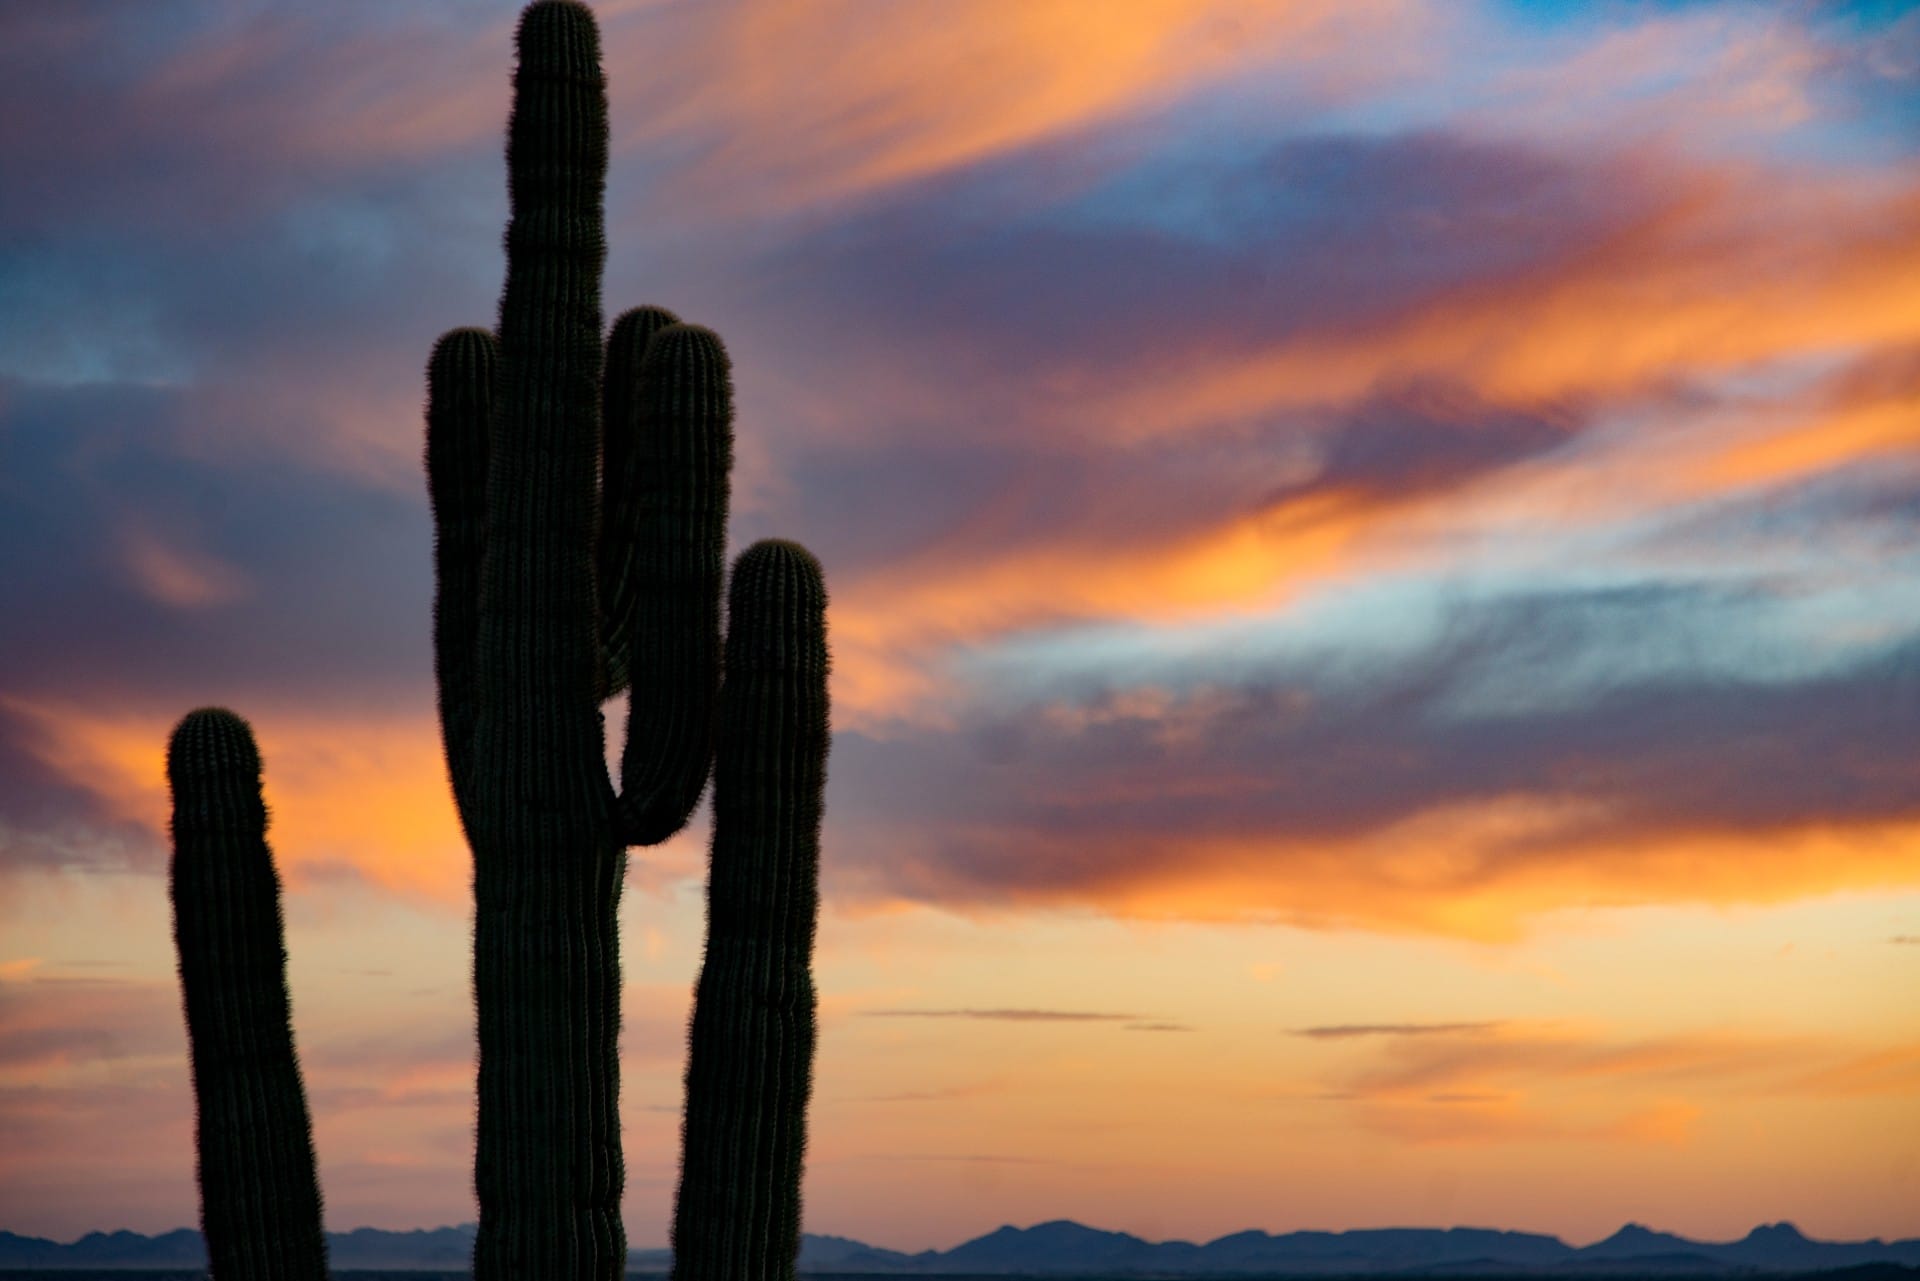 Cactus with sunset